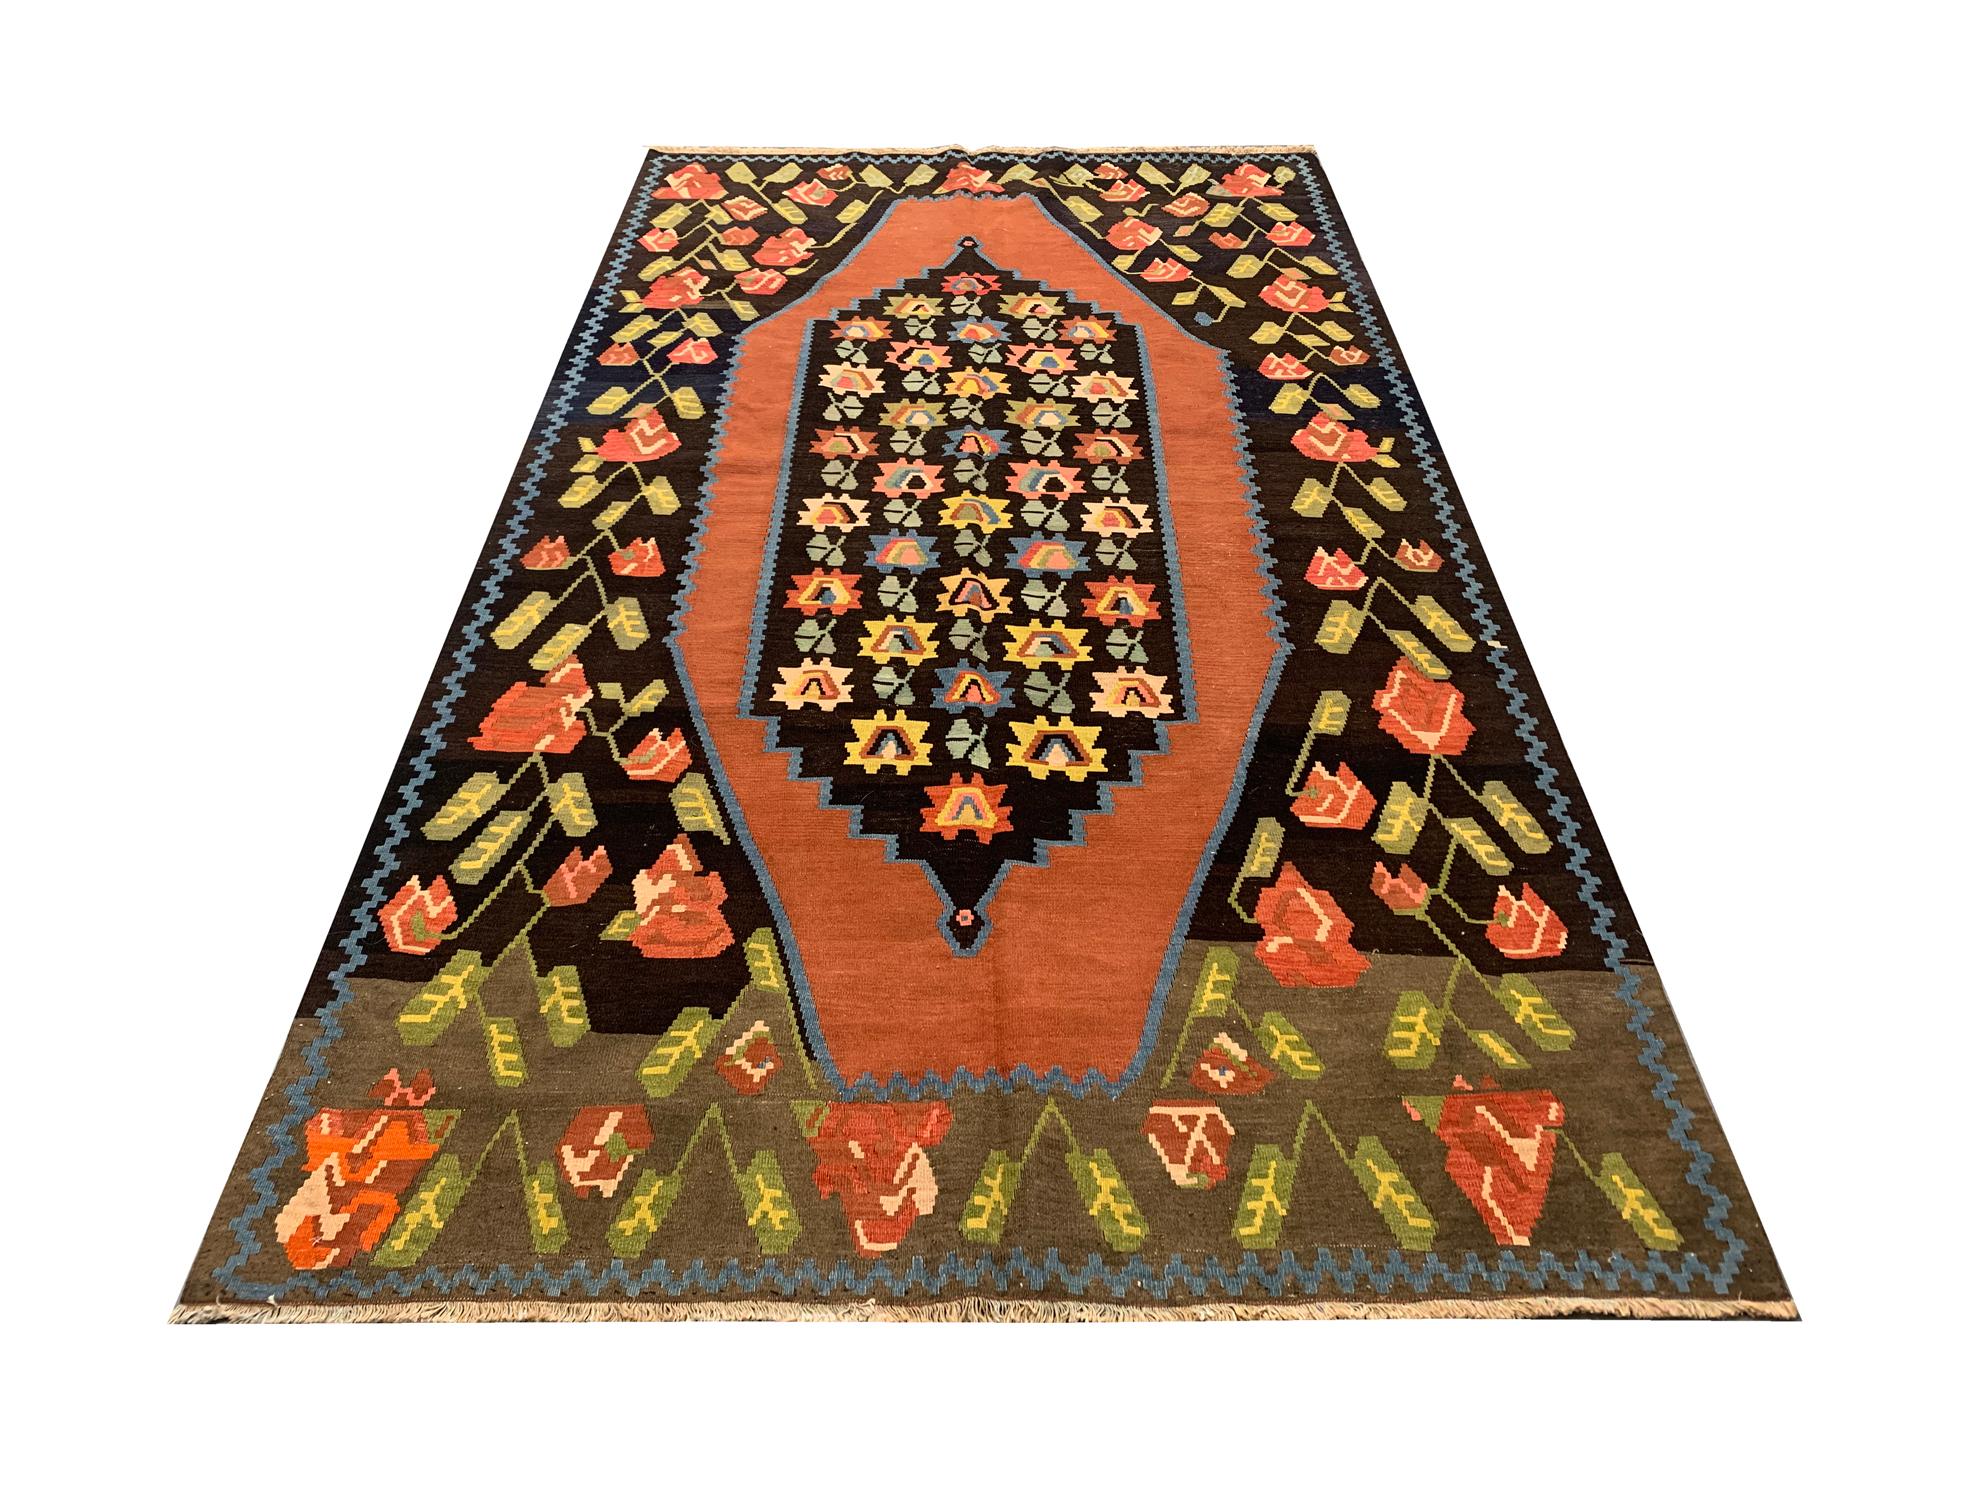 Handwoven with fine handspun wool this Karabagh Kilim is a beautiful example of antique Caucasian Kilim rugs. Brown, green, orange and yellow make up the main colors of this elegant wool rug. A dark field has been decorated with contrasting colors